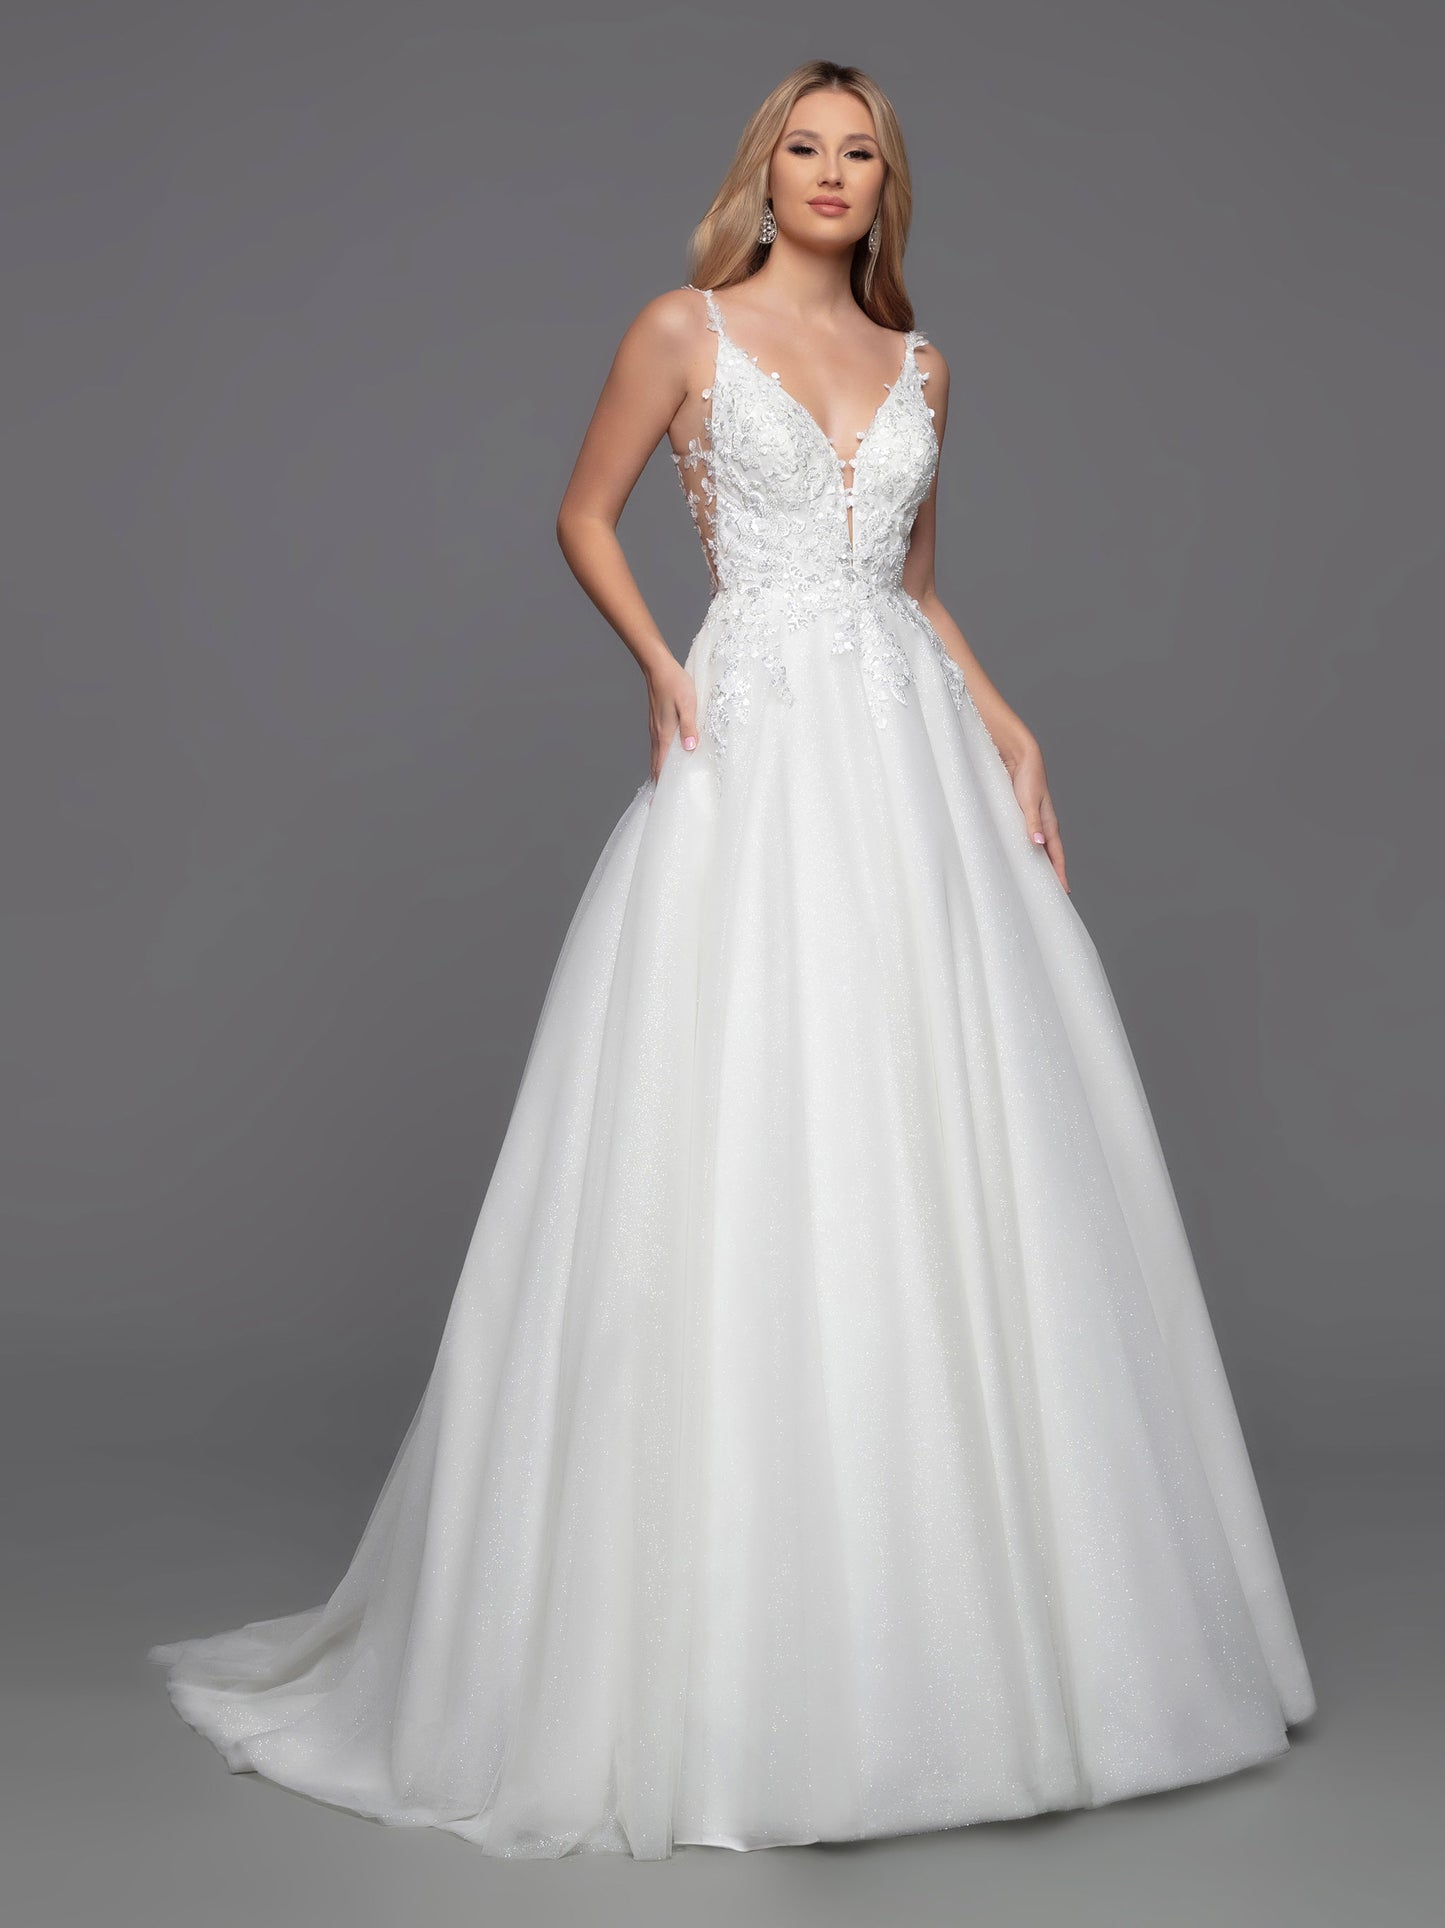 Davinci Bridal 50801 Long Shimmer Tulle Ballgown Sheer lace wedding dress Open Back is a timeless choice with a modern twist. This ball gown features a classic layered tulle skirt and a contemporary bodice with sheer sides, a low keyhole and covered button detail. The perfect combination of style and sophistication for any special occasion.  Sizes: 2-20  Colors: Ivory